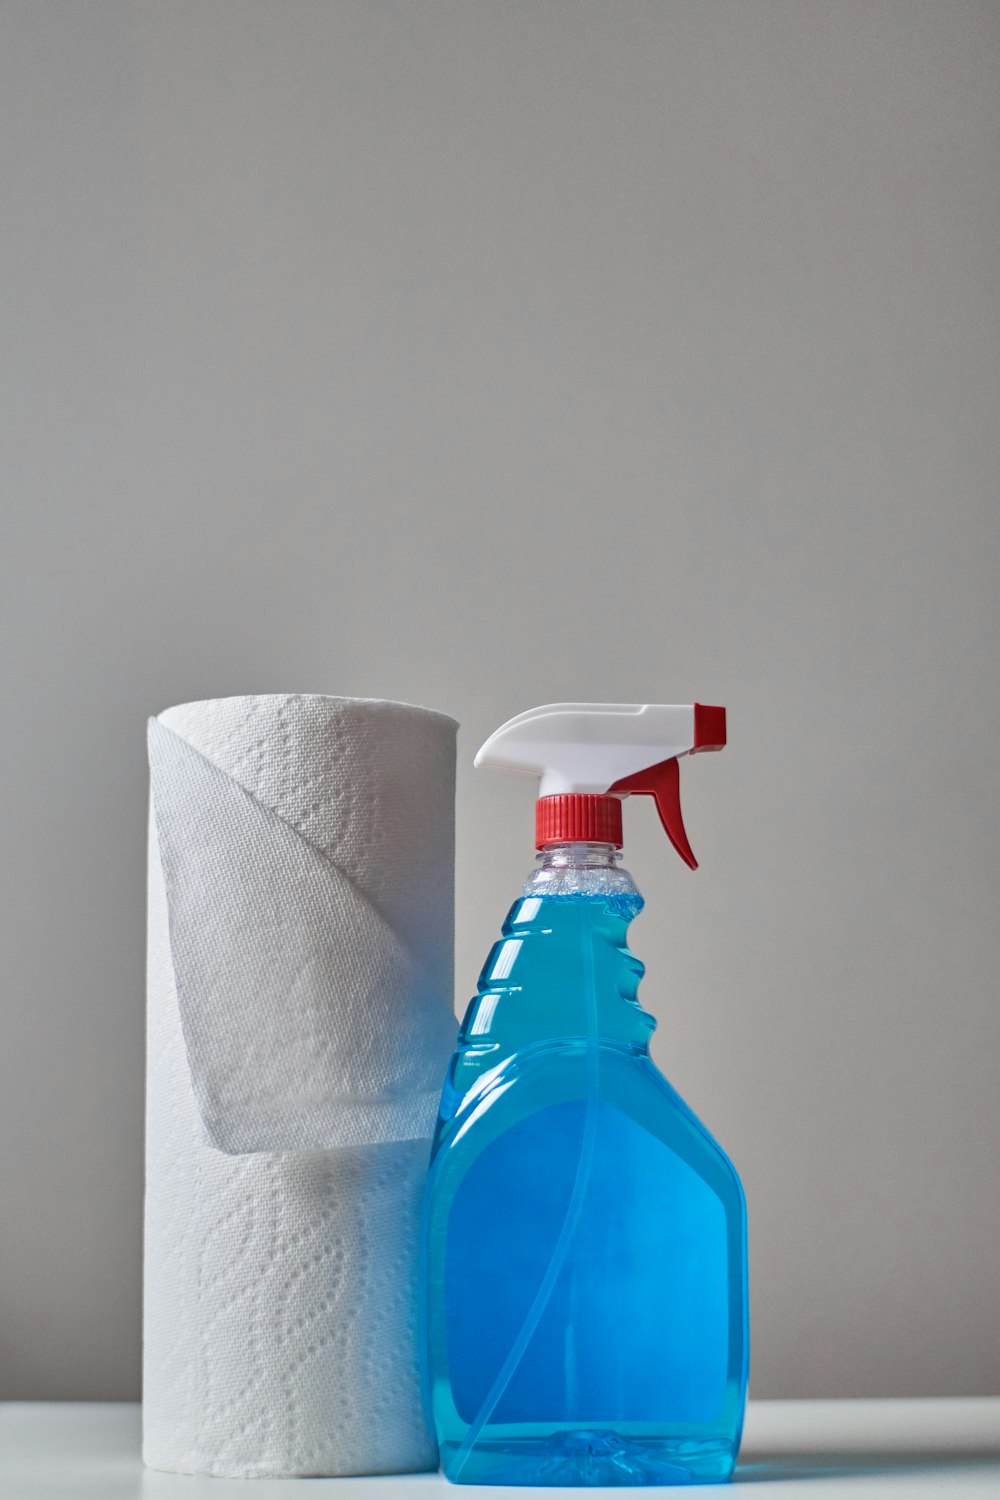 Spray solution on towel or cloth and not directly onto surface